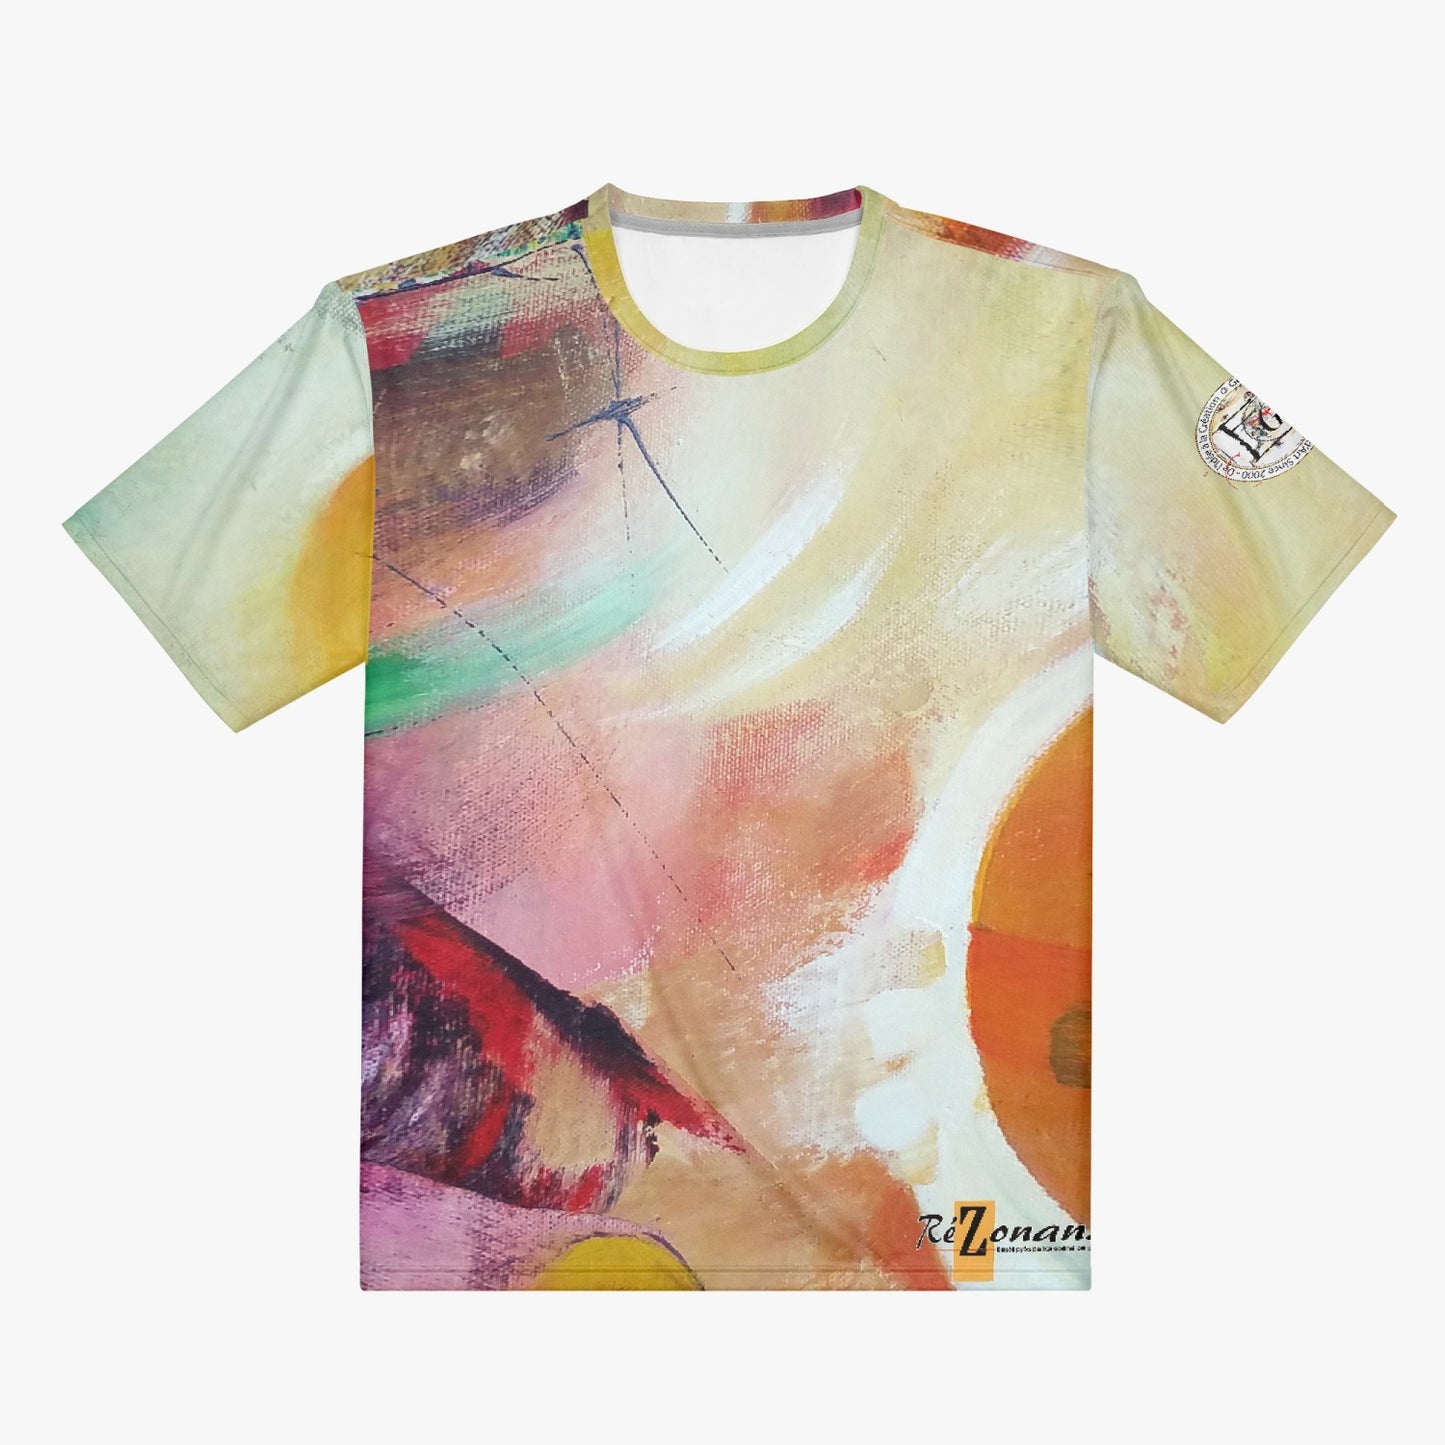 All-over "Shades" T-shirt